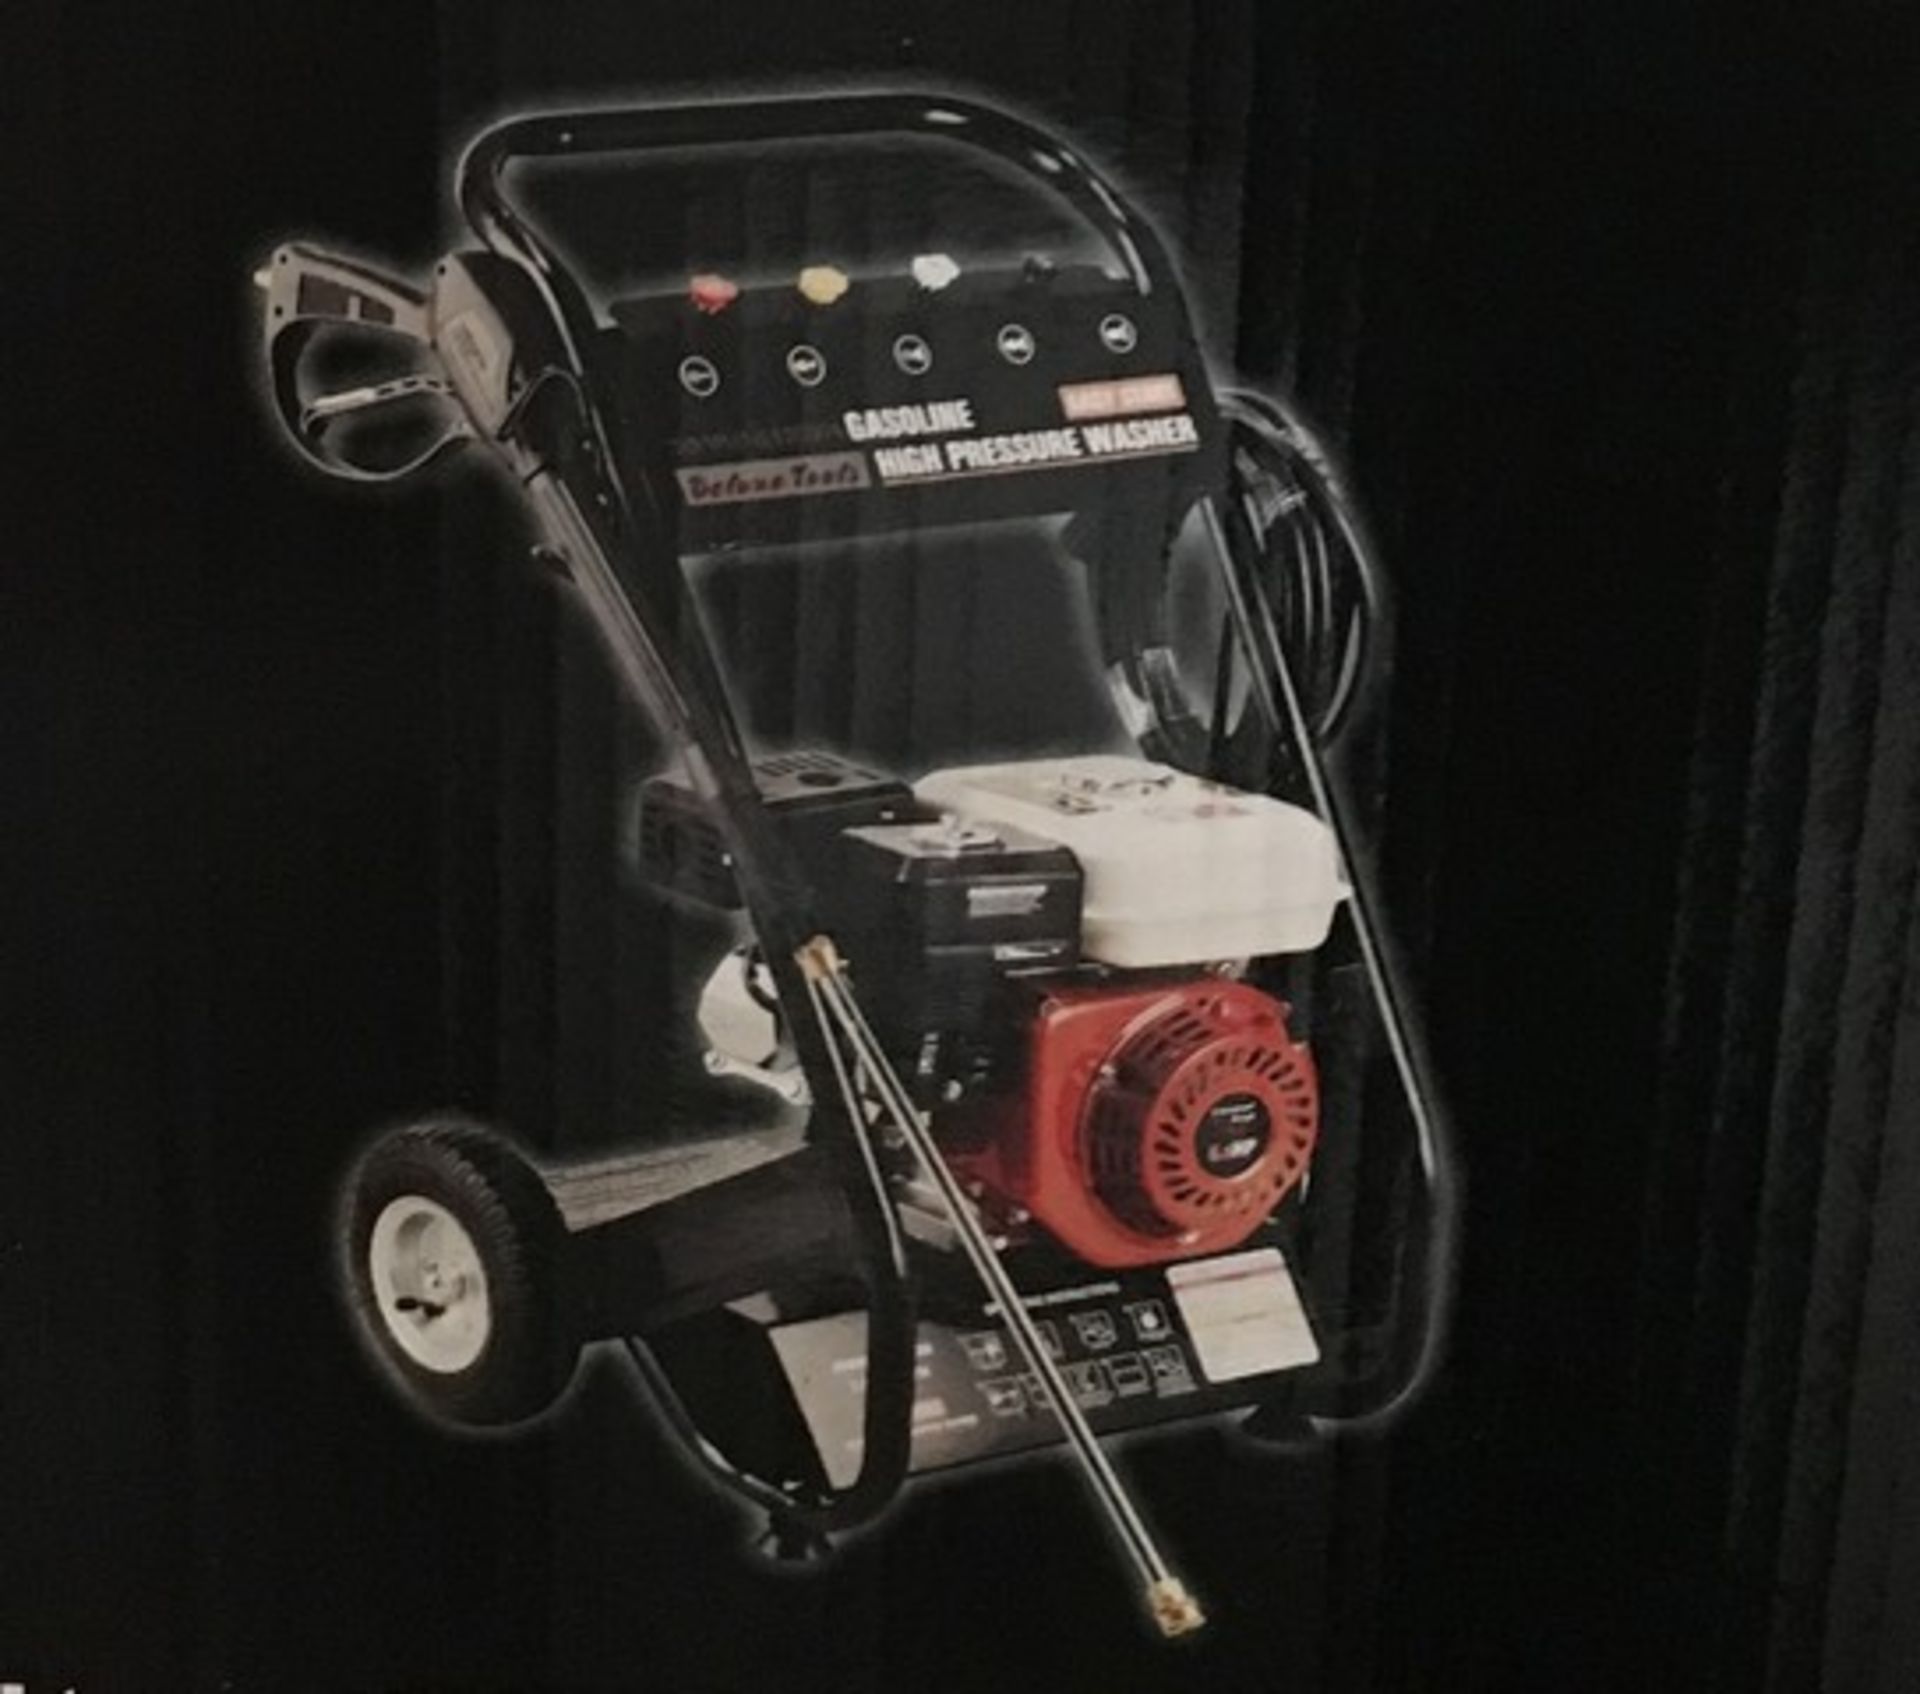 V Brand New Pressure Washer With Petrol Engine 3000PSI - 3GPM Flow Rate ISP £219.99 (Parker) (No